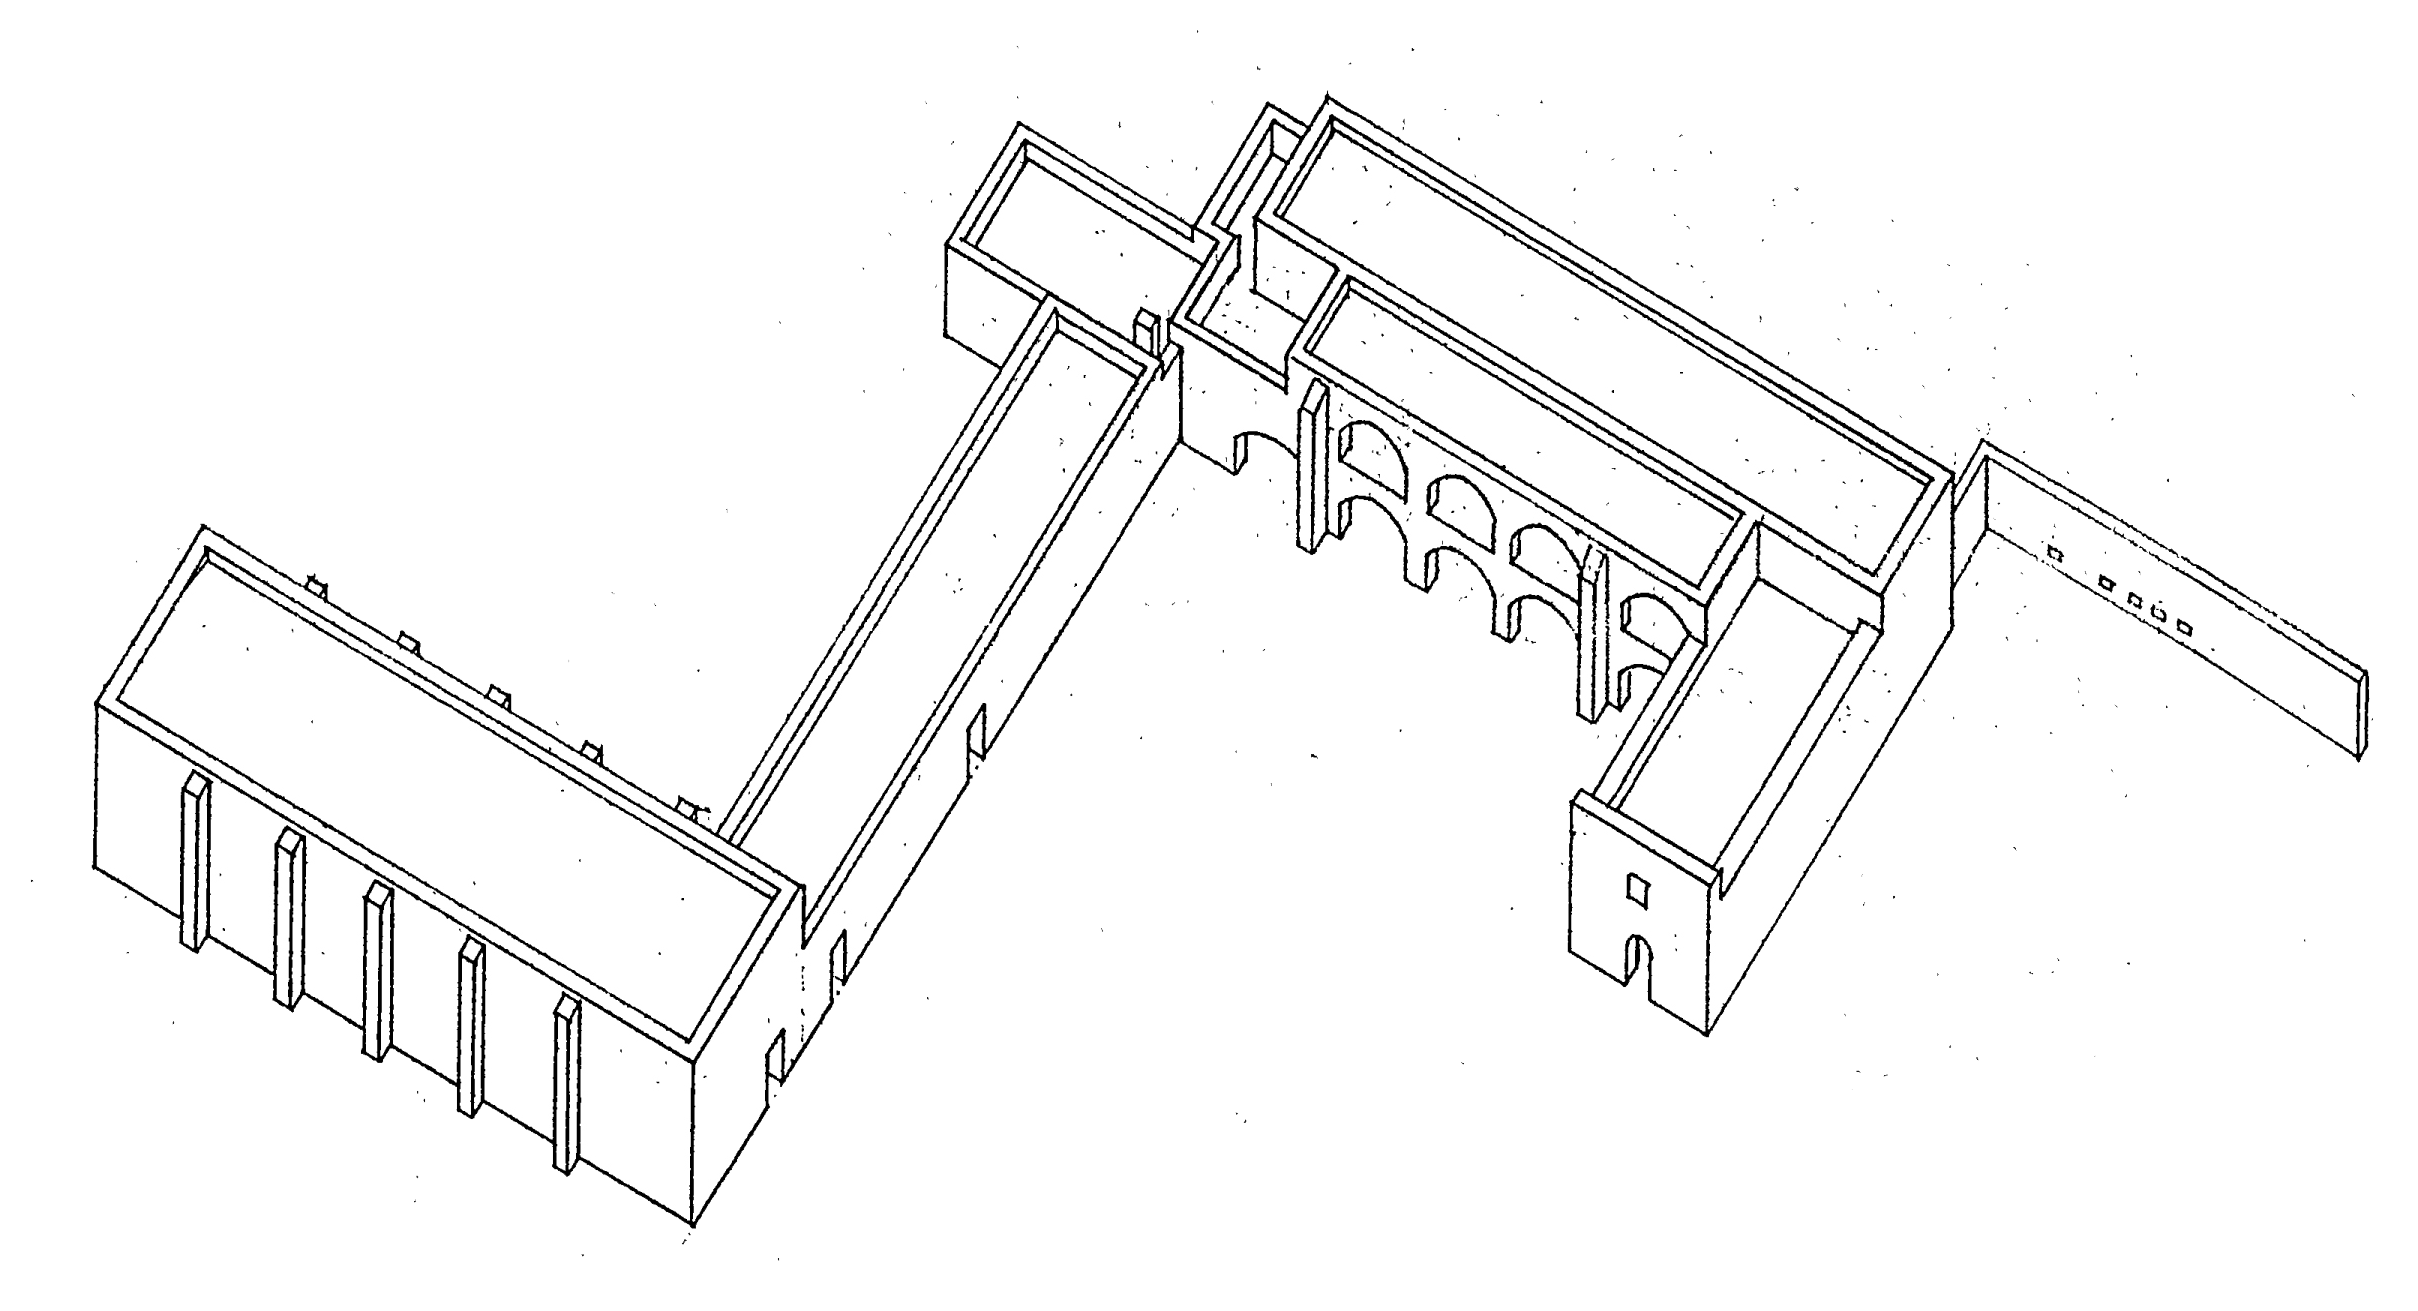 Isometric of one of the Missions